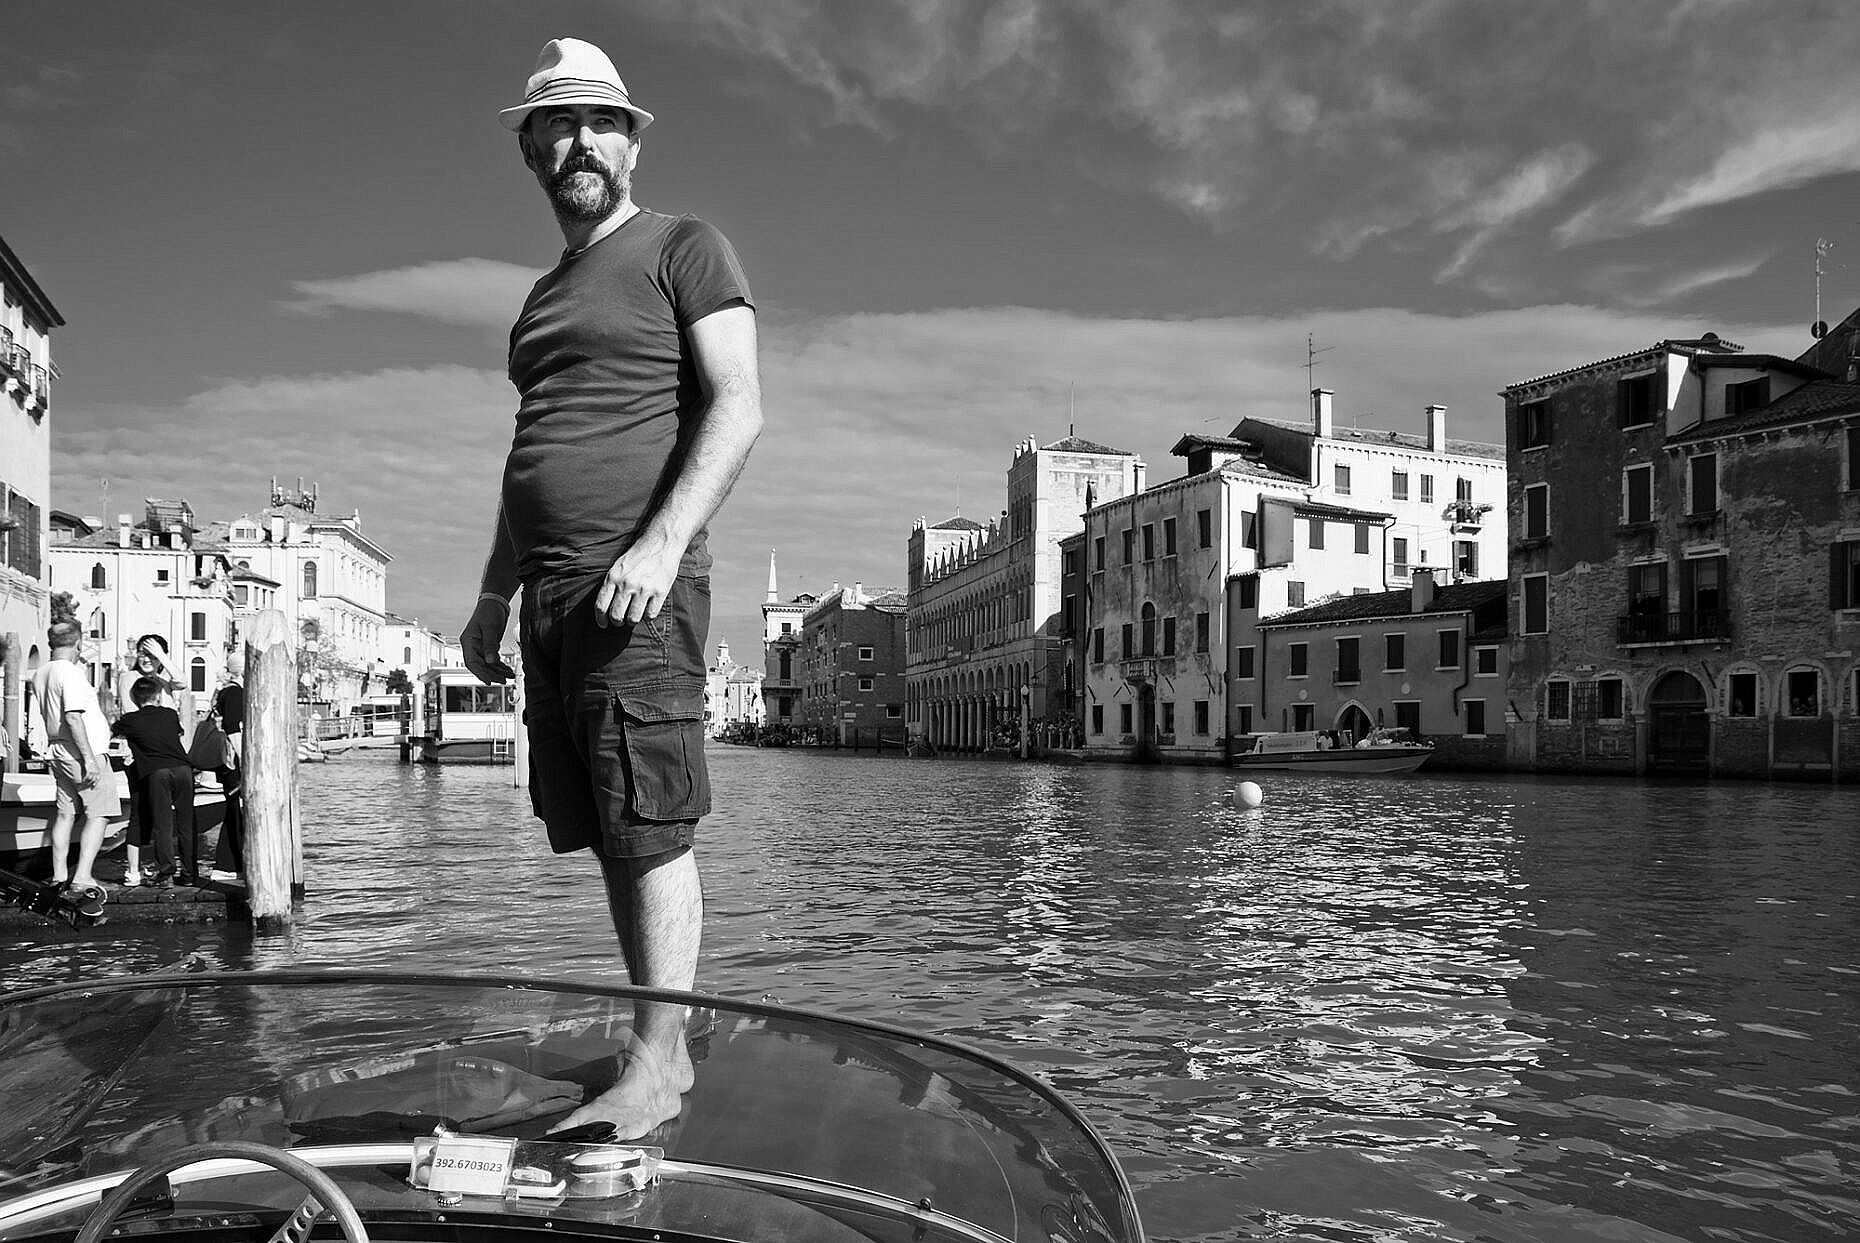 Francesco Penzo on the lookout for the Regata Storica 2018, standing on the front of his motor boat on the Grand Canal